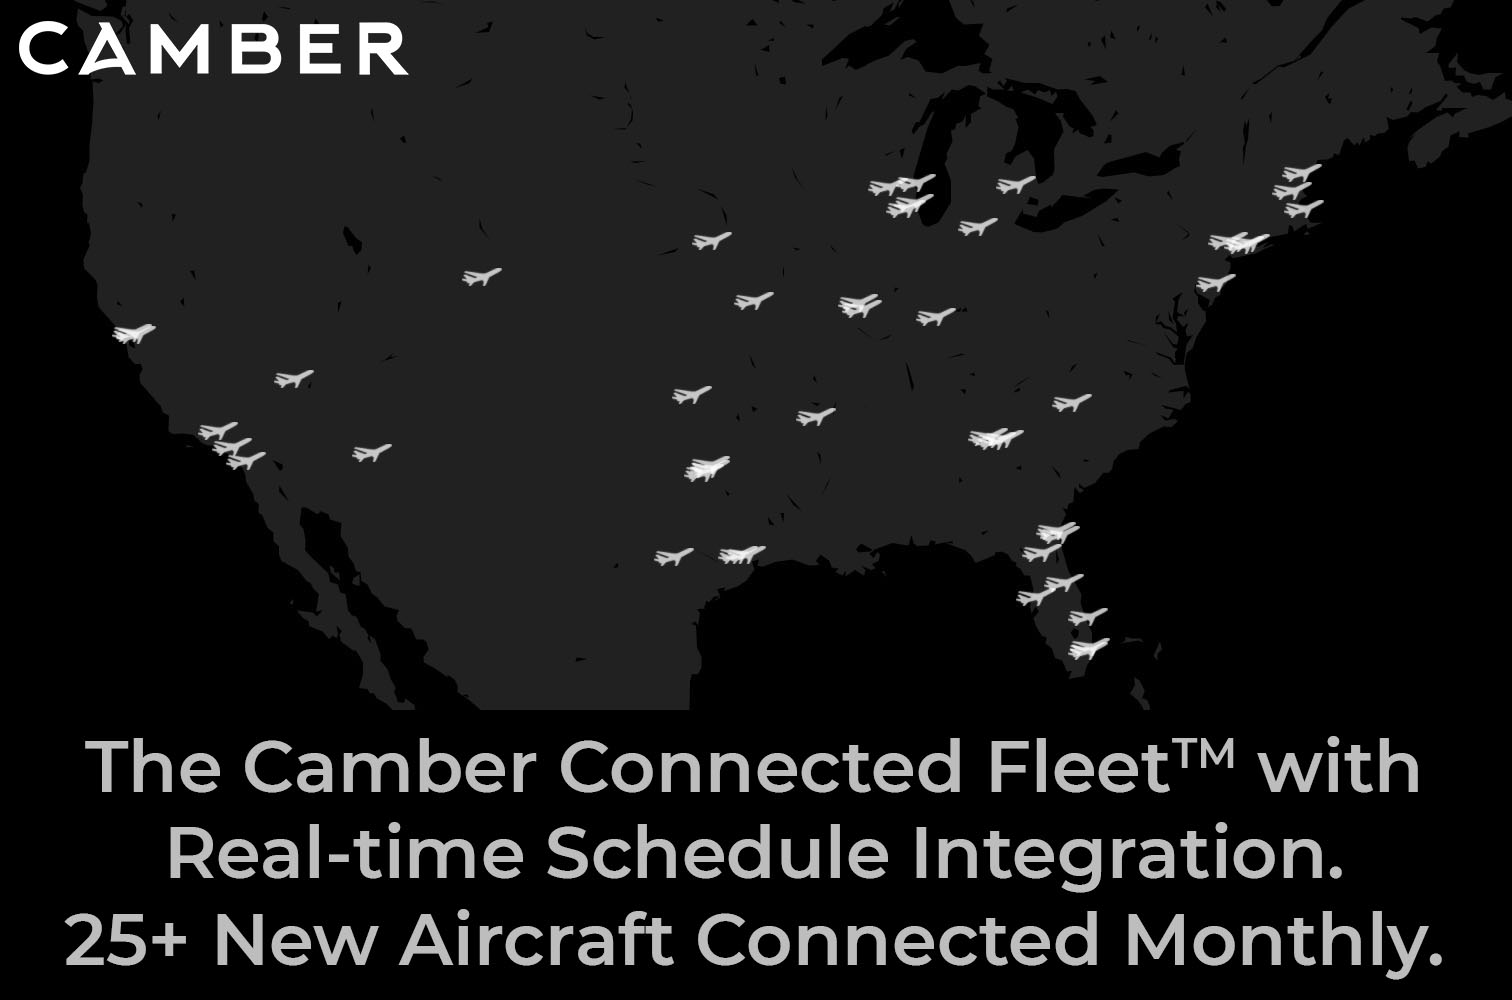 The Camber Connected Fleet with Real-time Schedule Integration. 25+ New Private Charter Aircraft Connected Monthly.